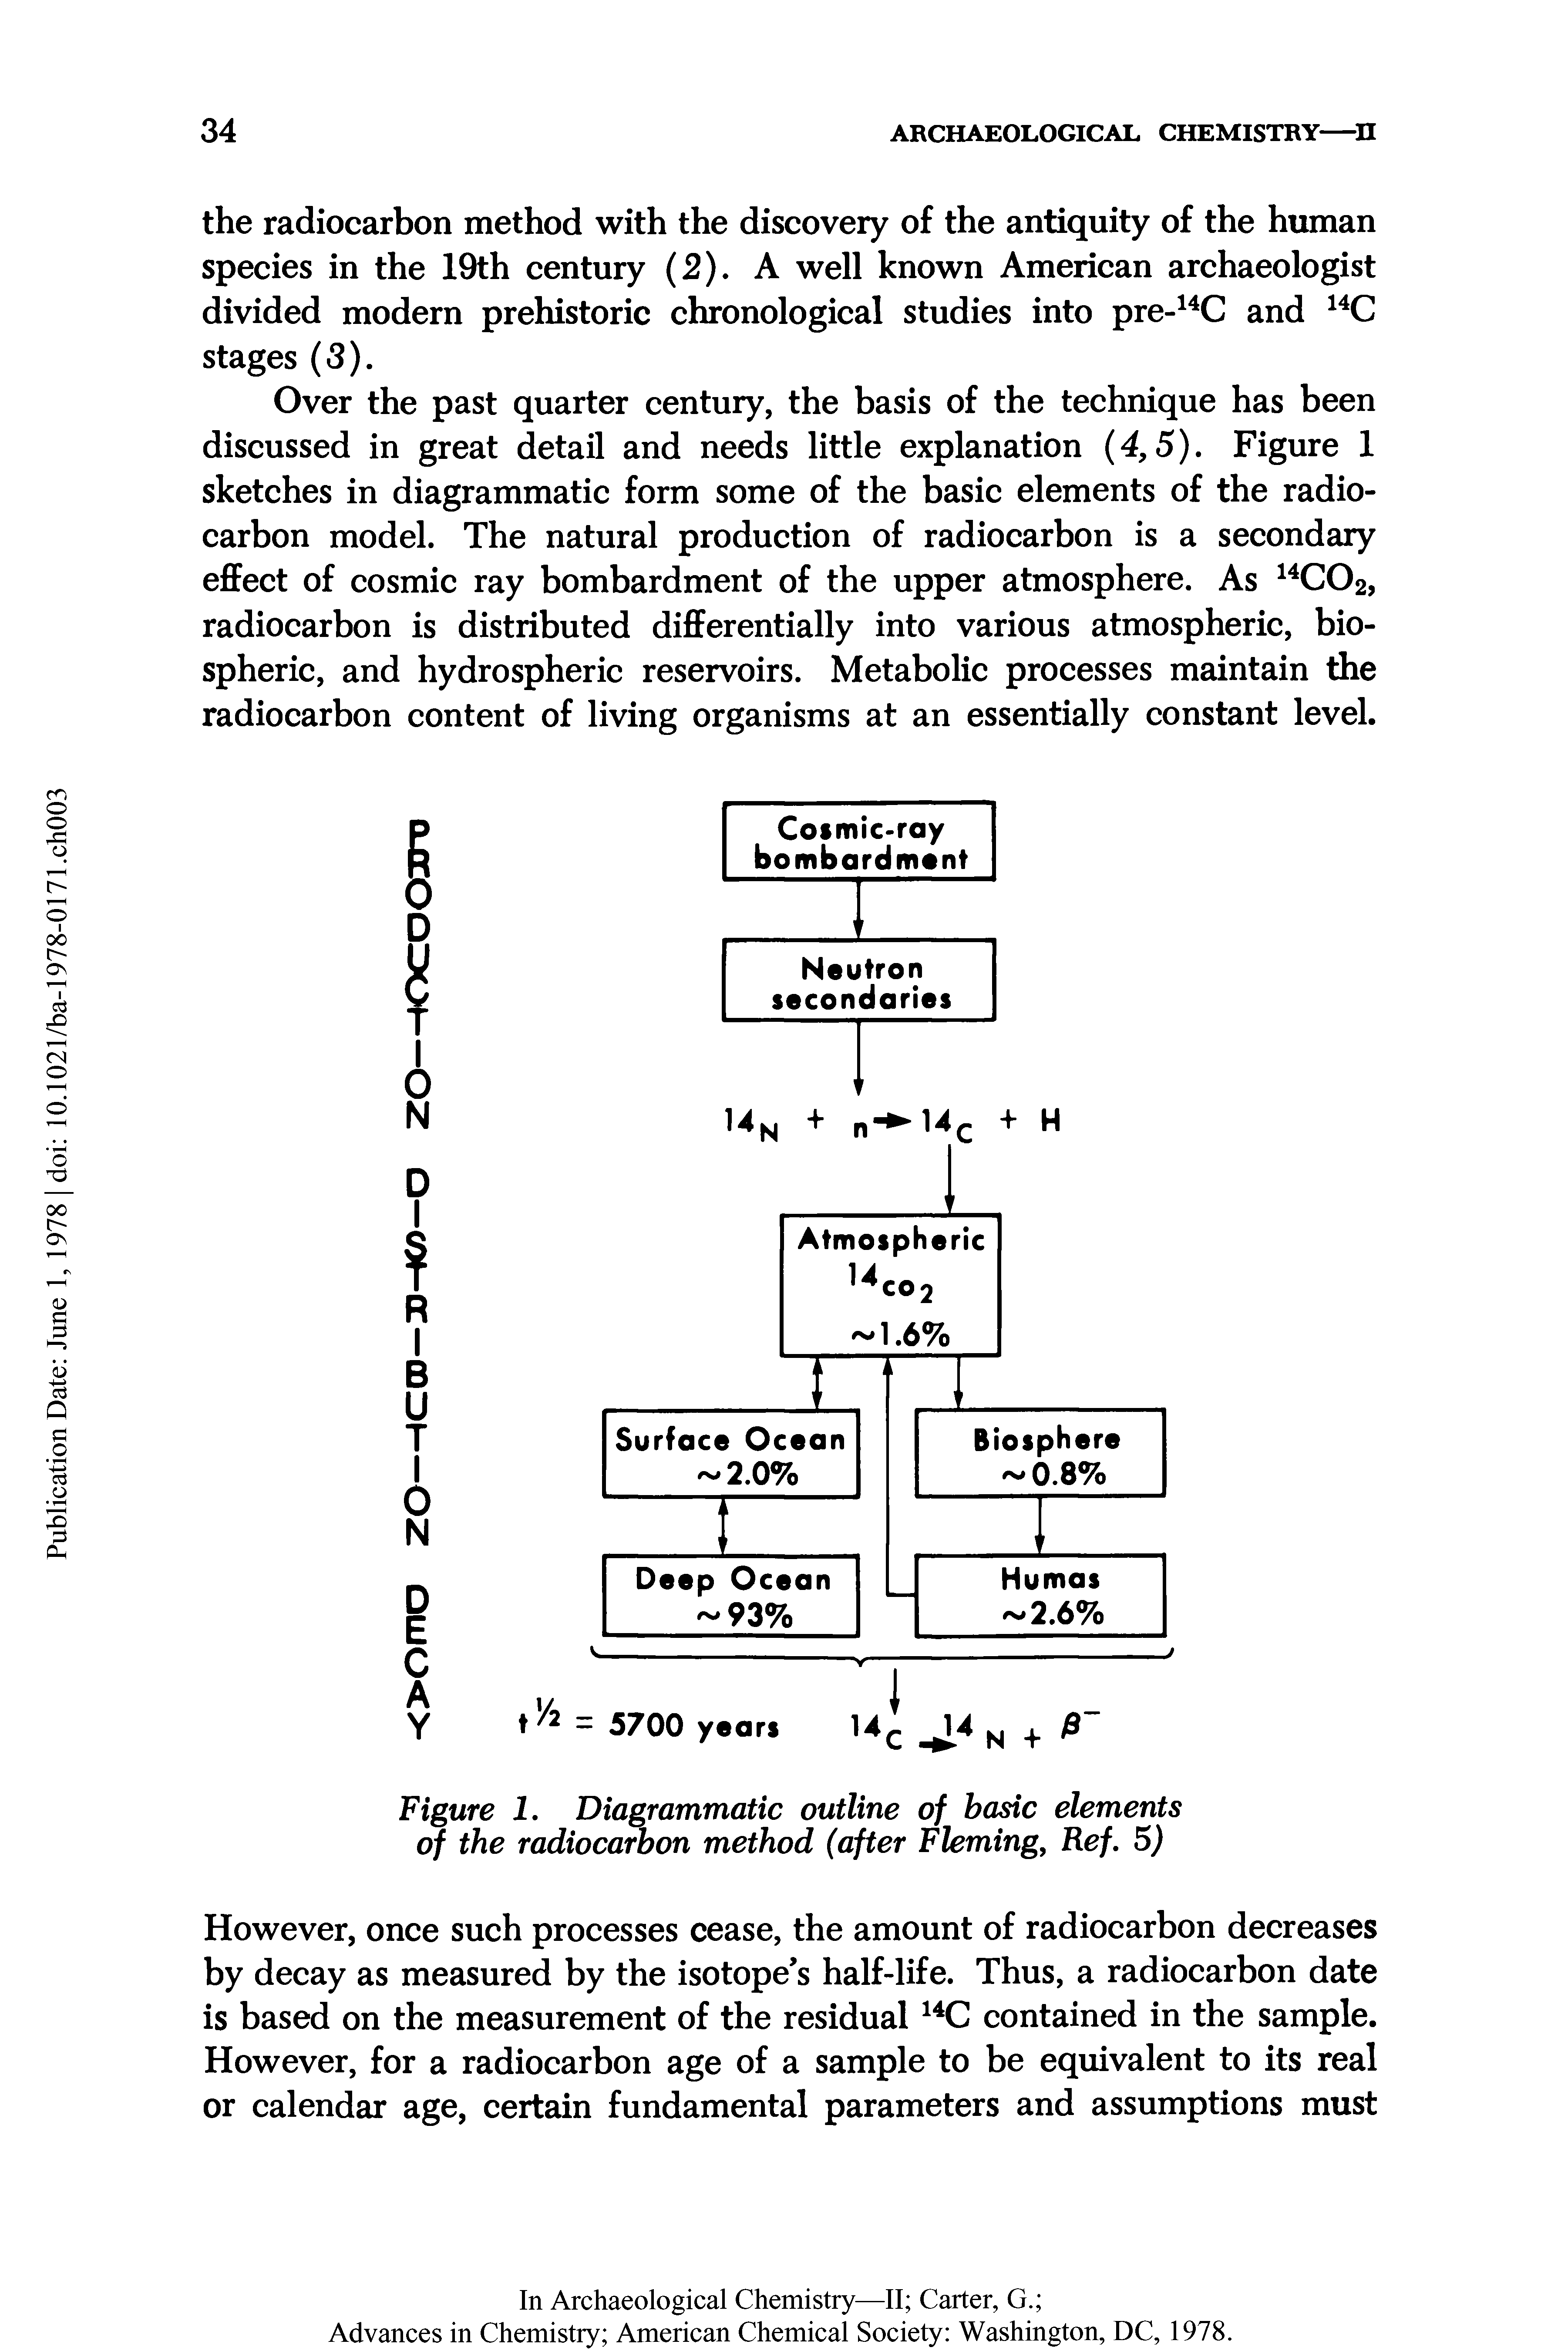 Figure I. Diagrammatic outline of basic elements o/ the radiocarbon method (after Fleming, Ref. 5)...